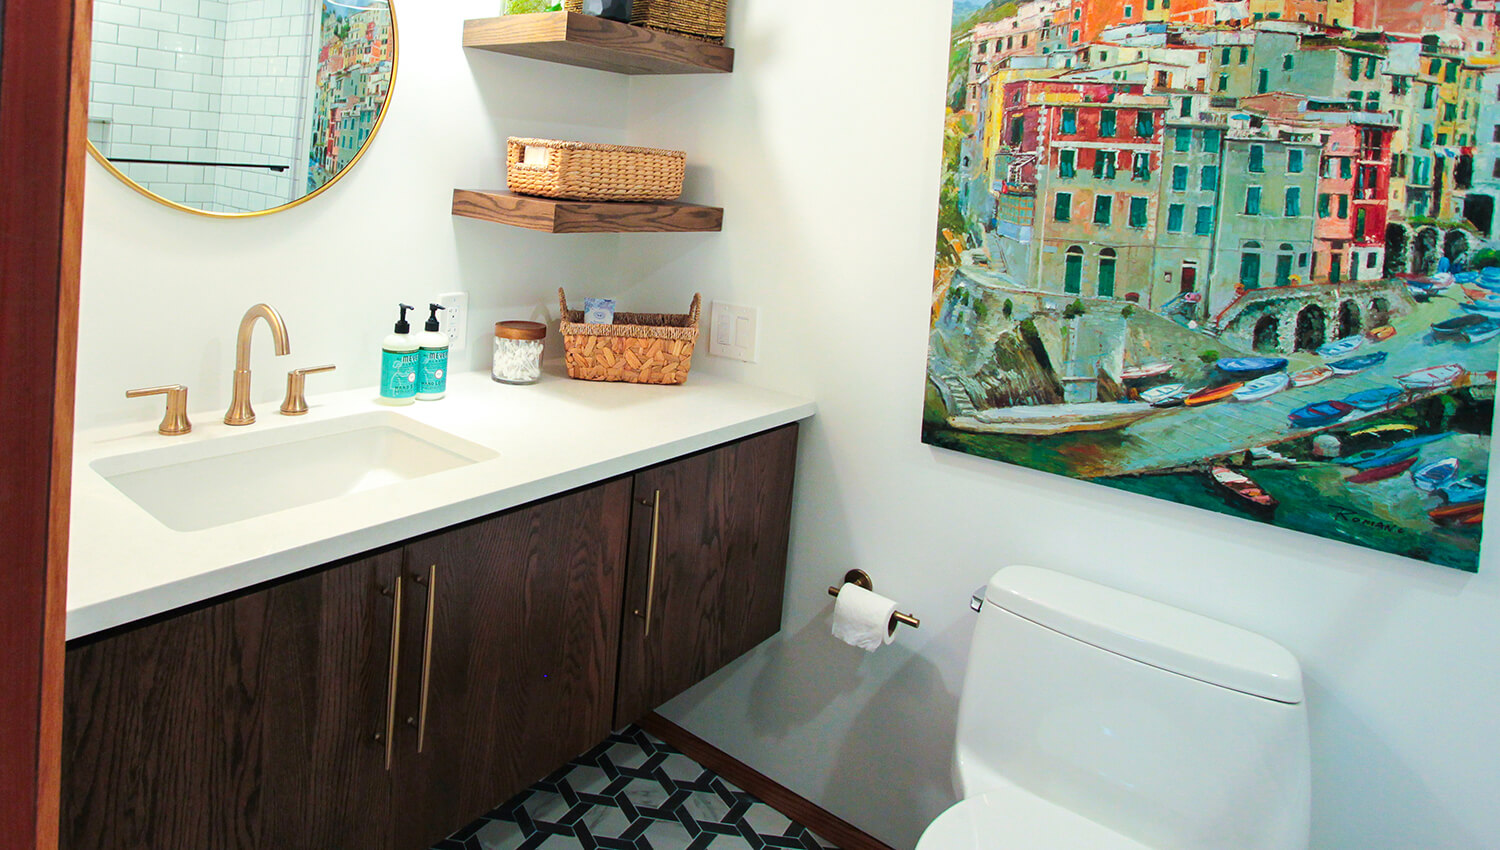 A colorful mid-century modern bathroom with a floating vanity from Dura Supreme.